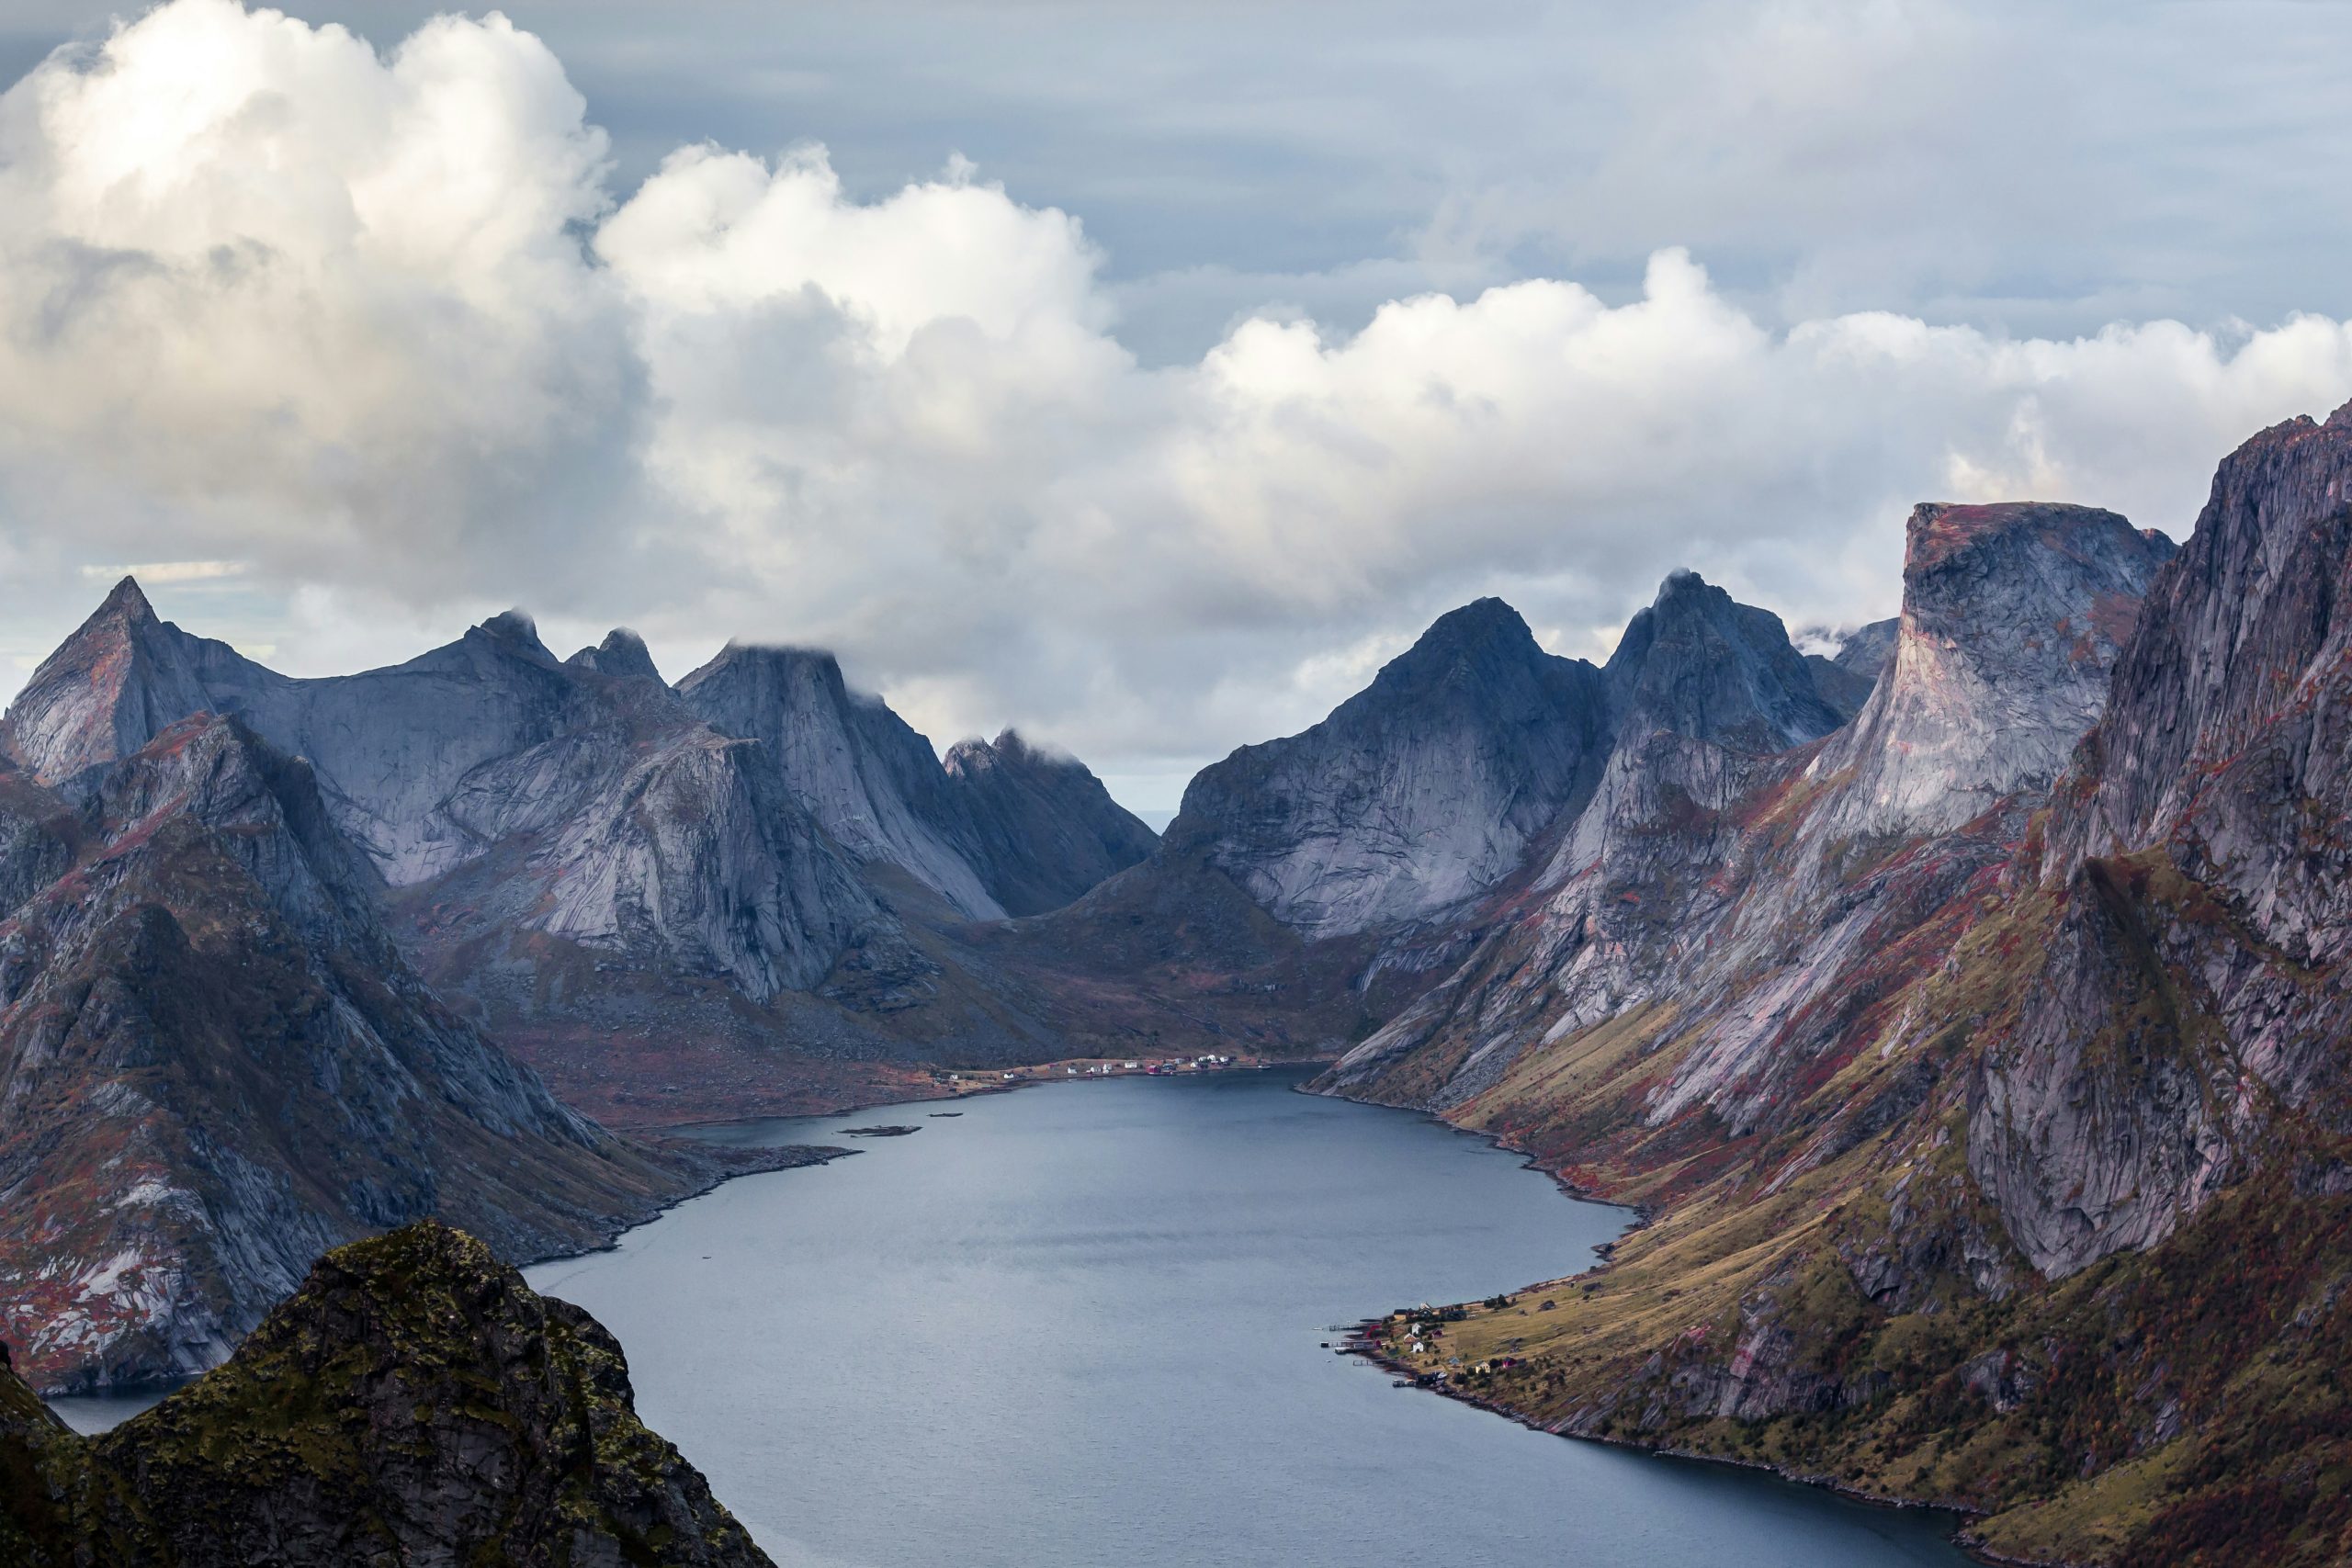 explore the stunning fjords of norway and witness the breathtaking beauty of nature. plan your adventure today and immerse yourself in the majesty of fjords.